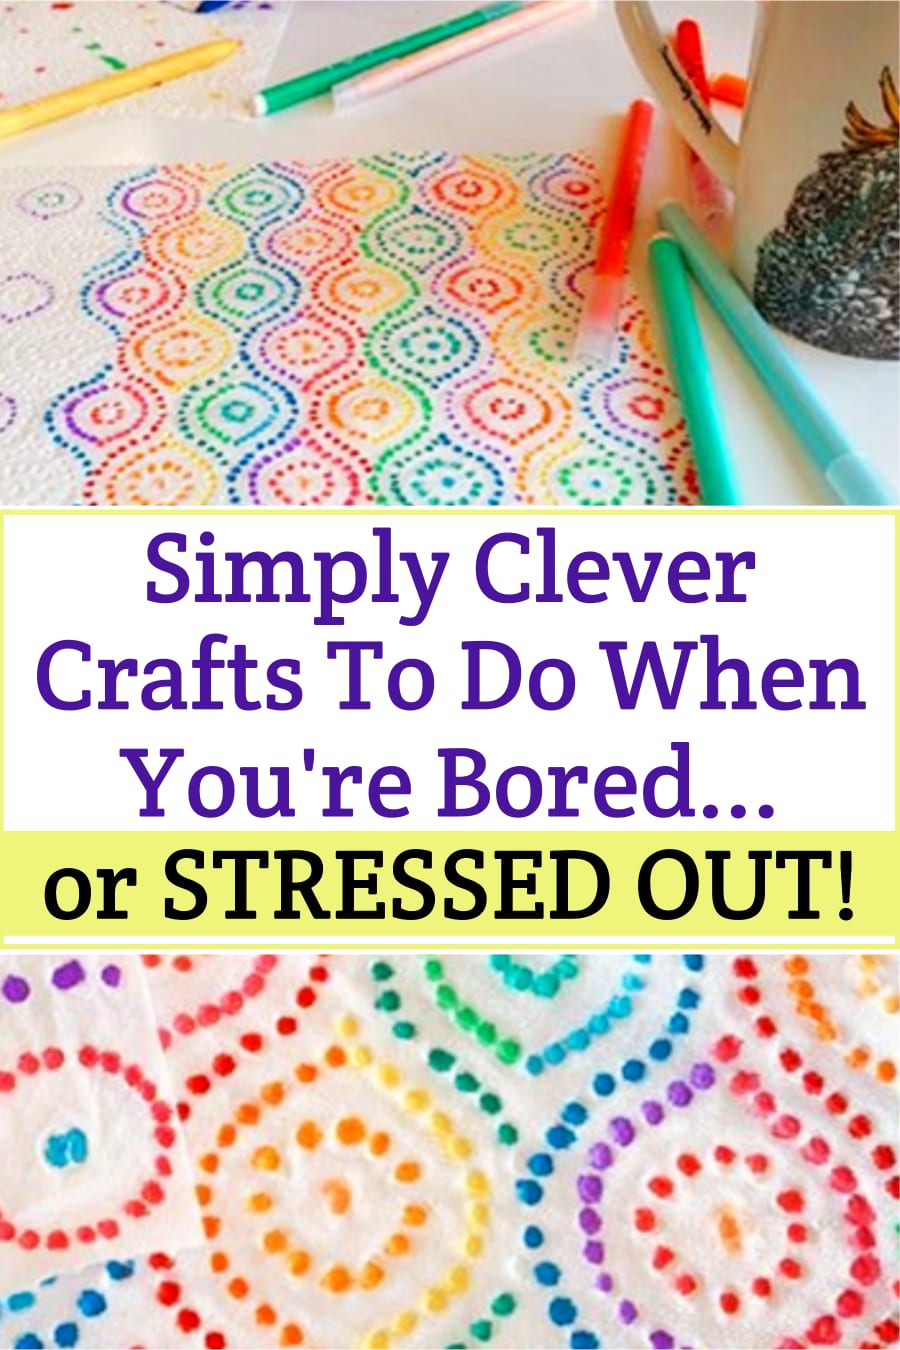 5 Minute Craft Projects To Do When You're BORED! Try these fun crafts to do when you're bored at home with a friend - paper towel coloring craft with markers